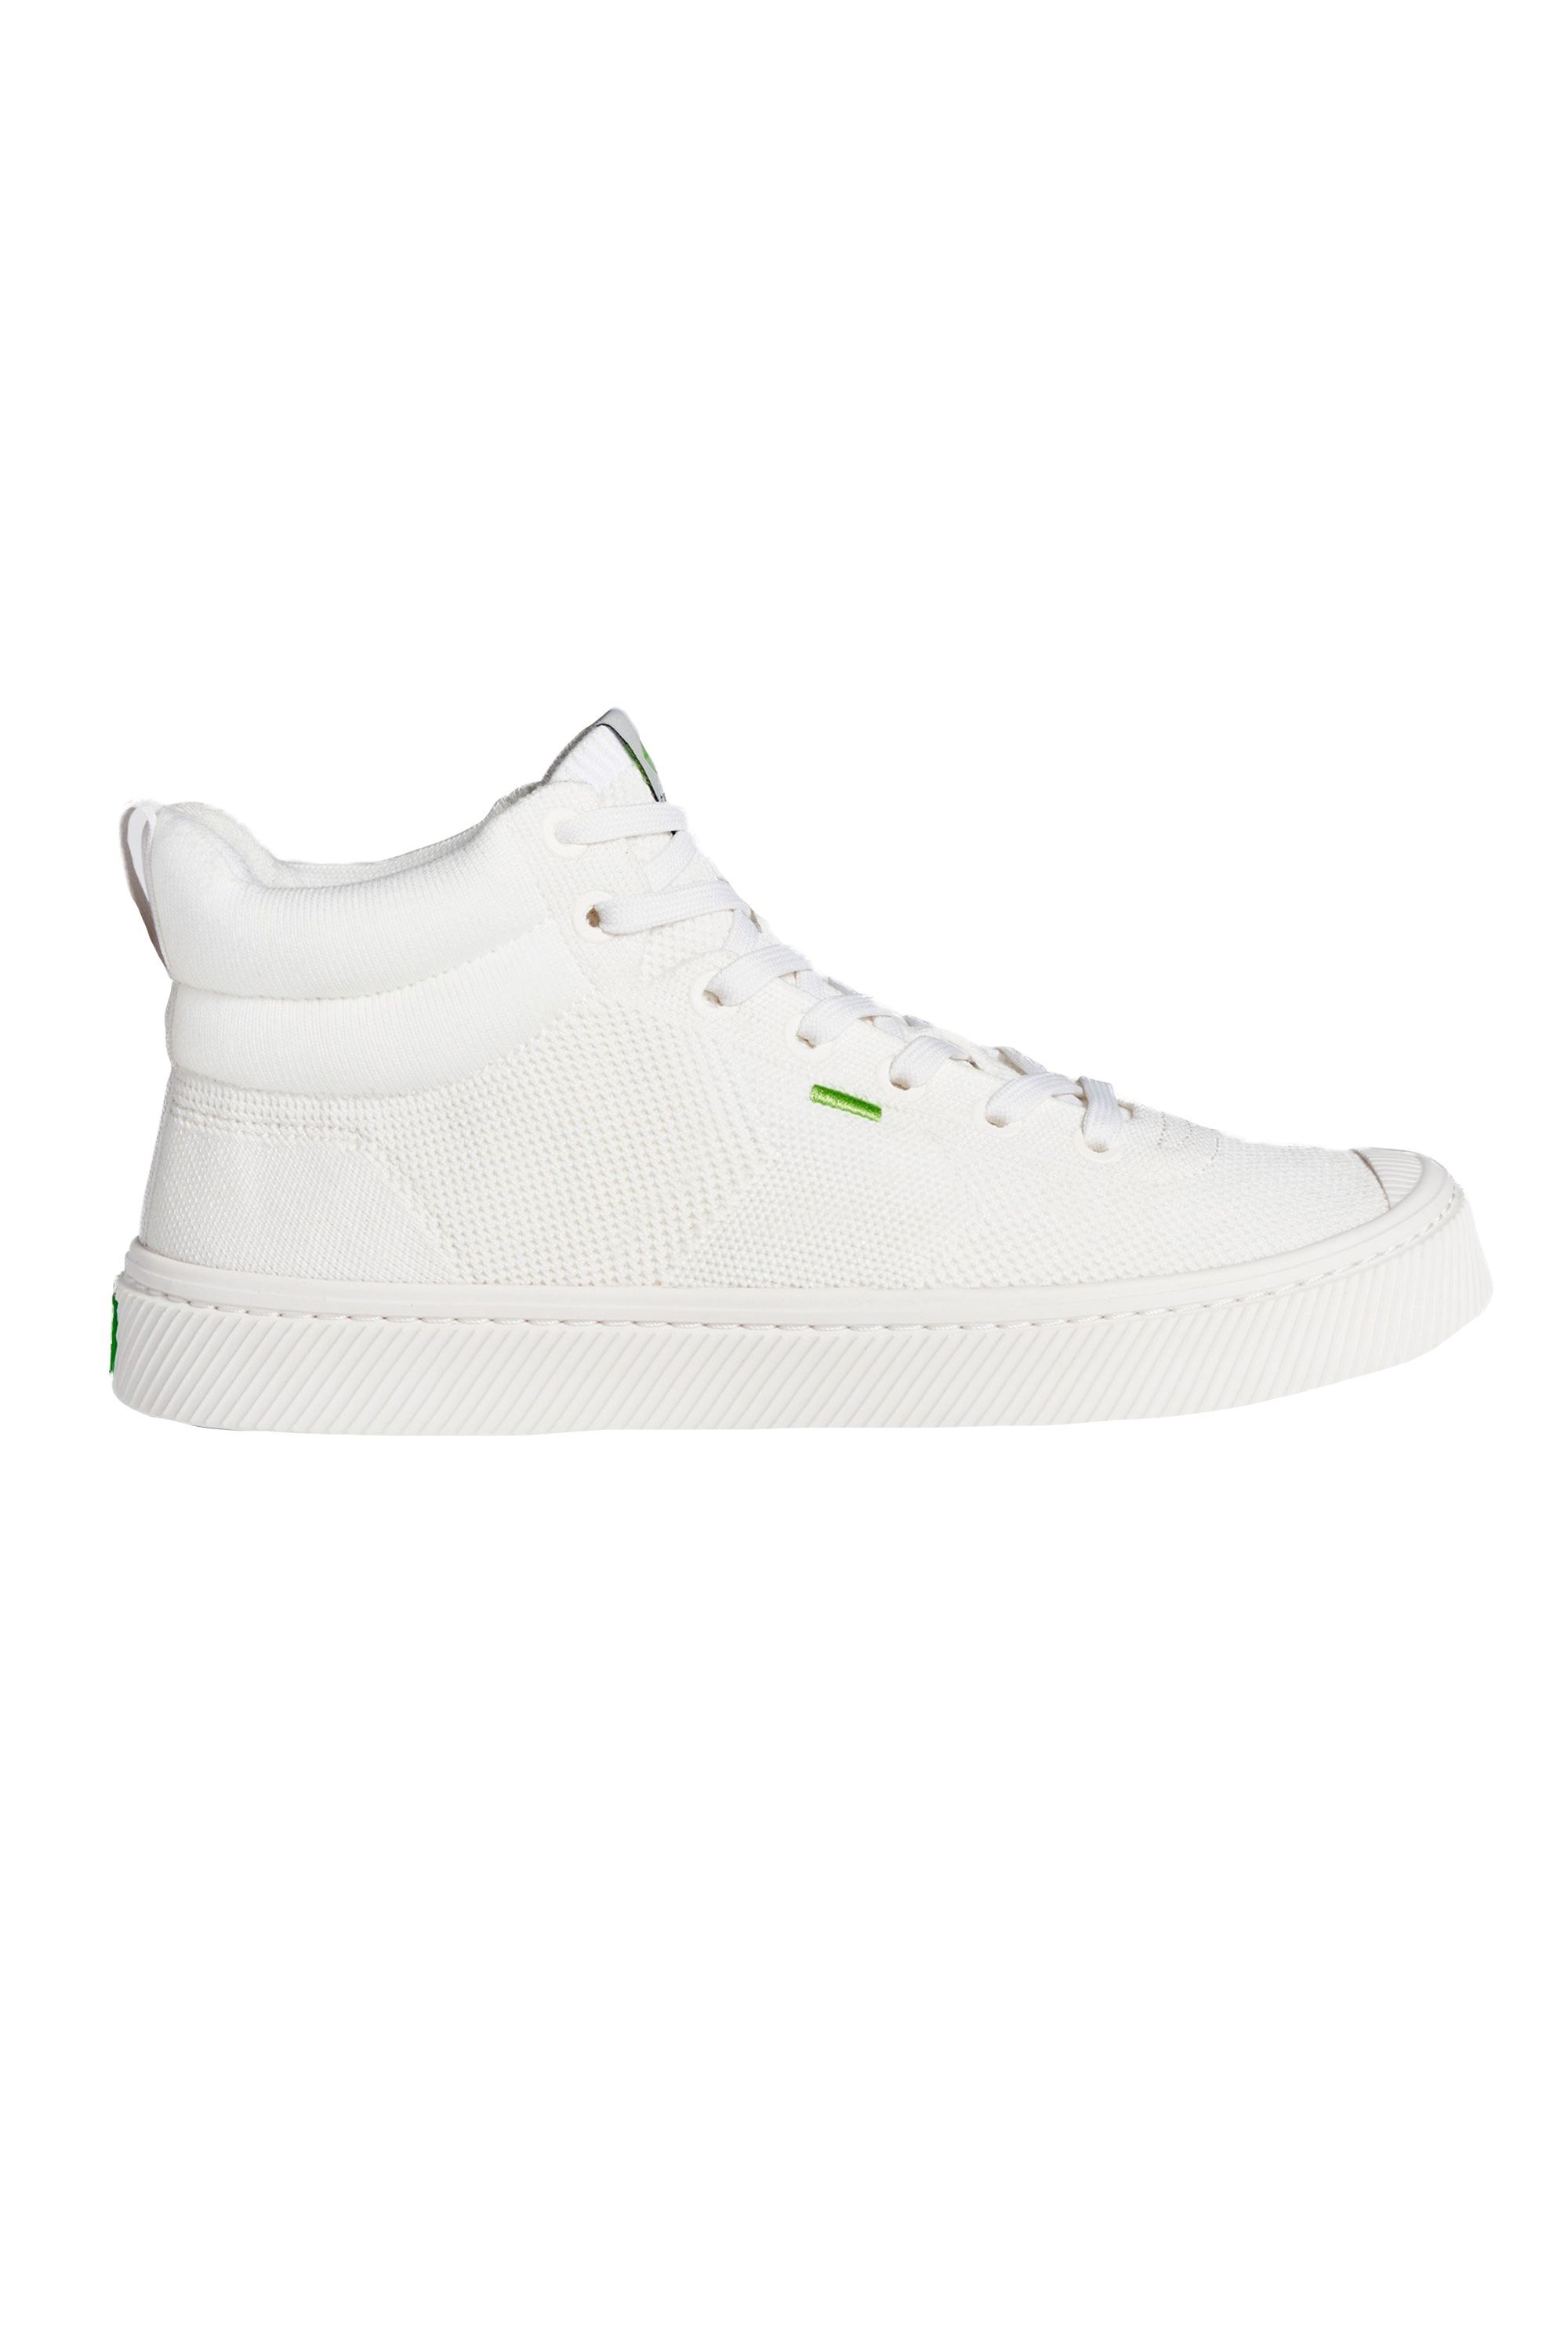 all white nike high top shoes